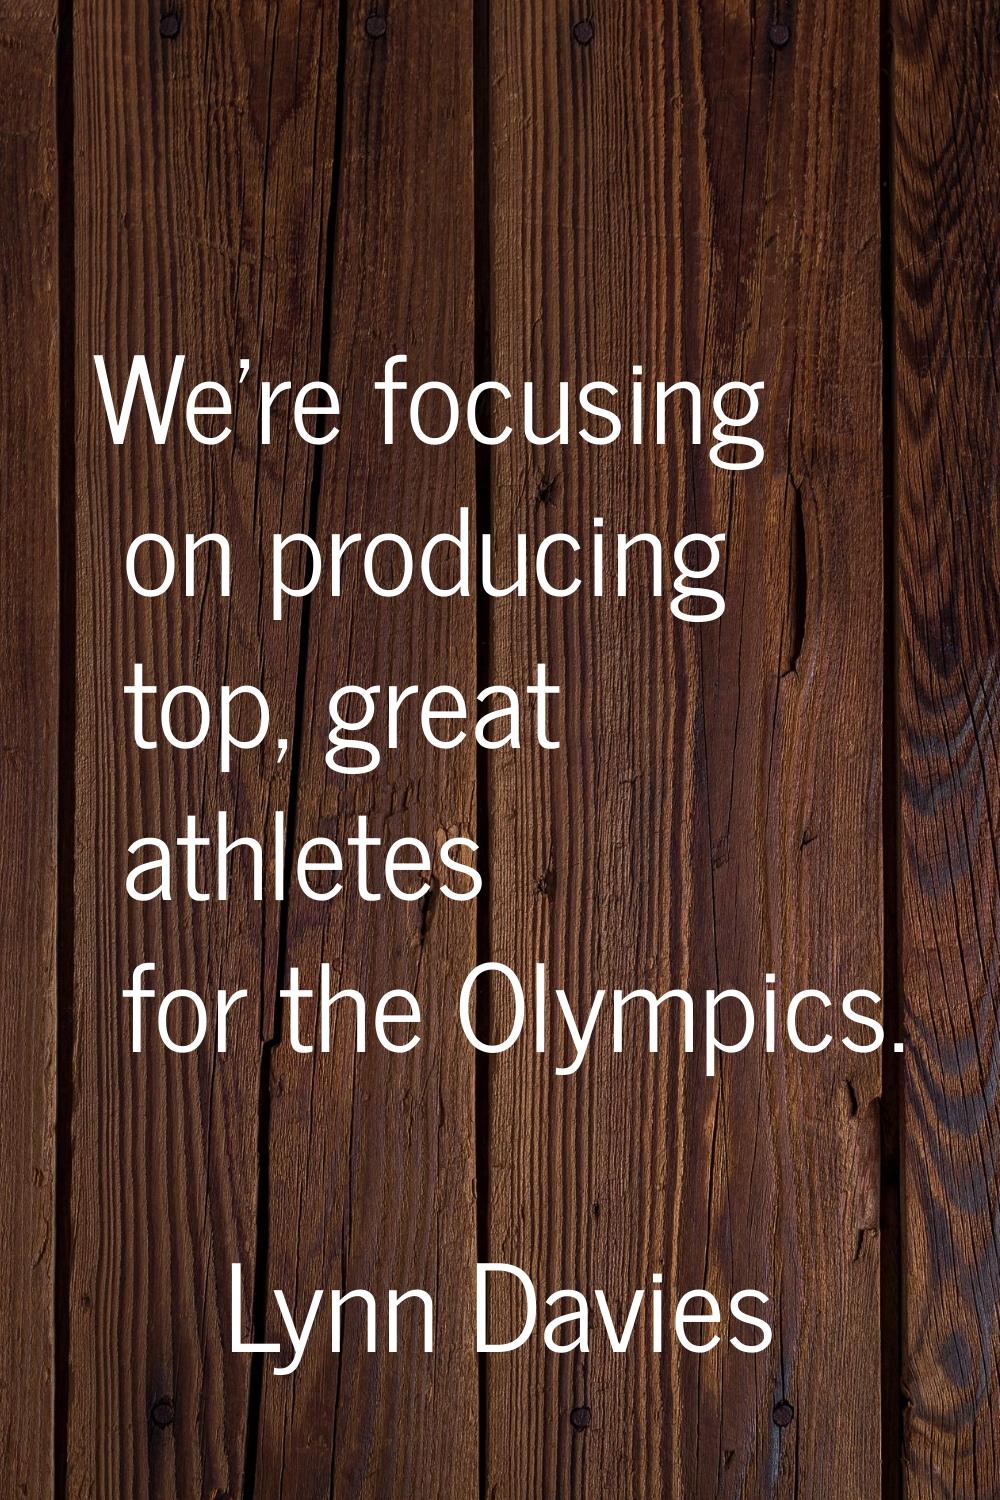 We're focusing on producing top, great athletes for the Olympics.